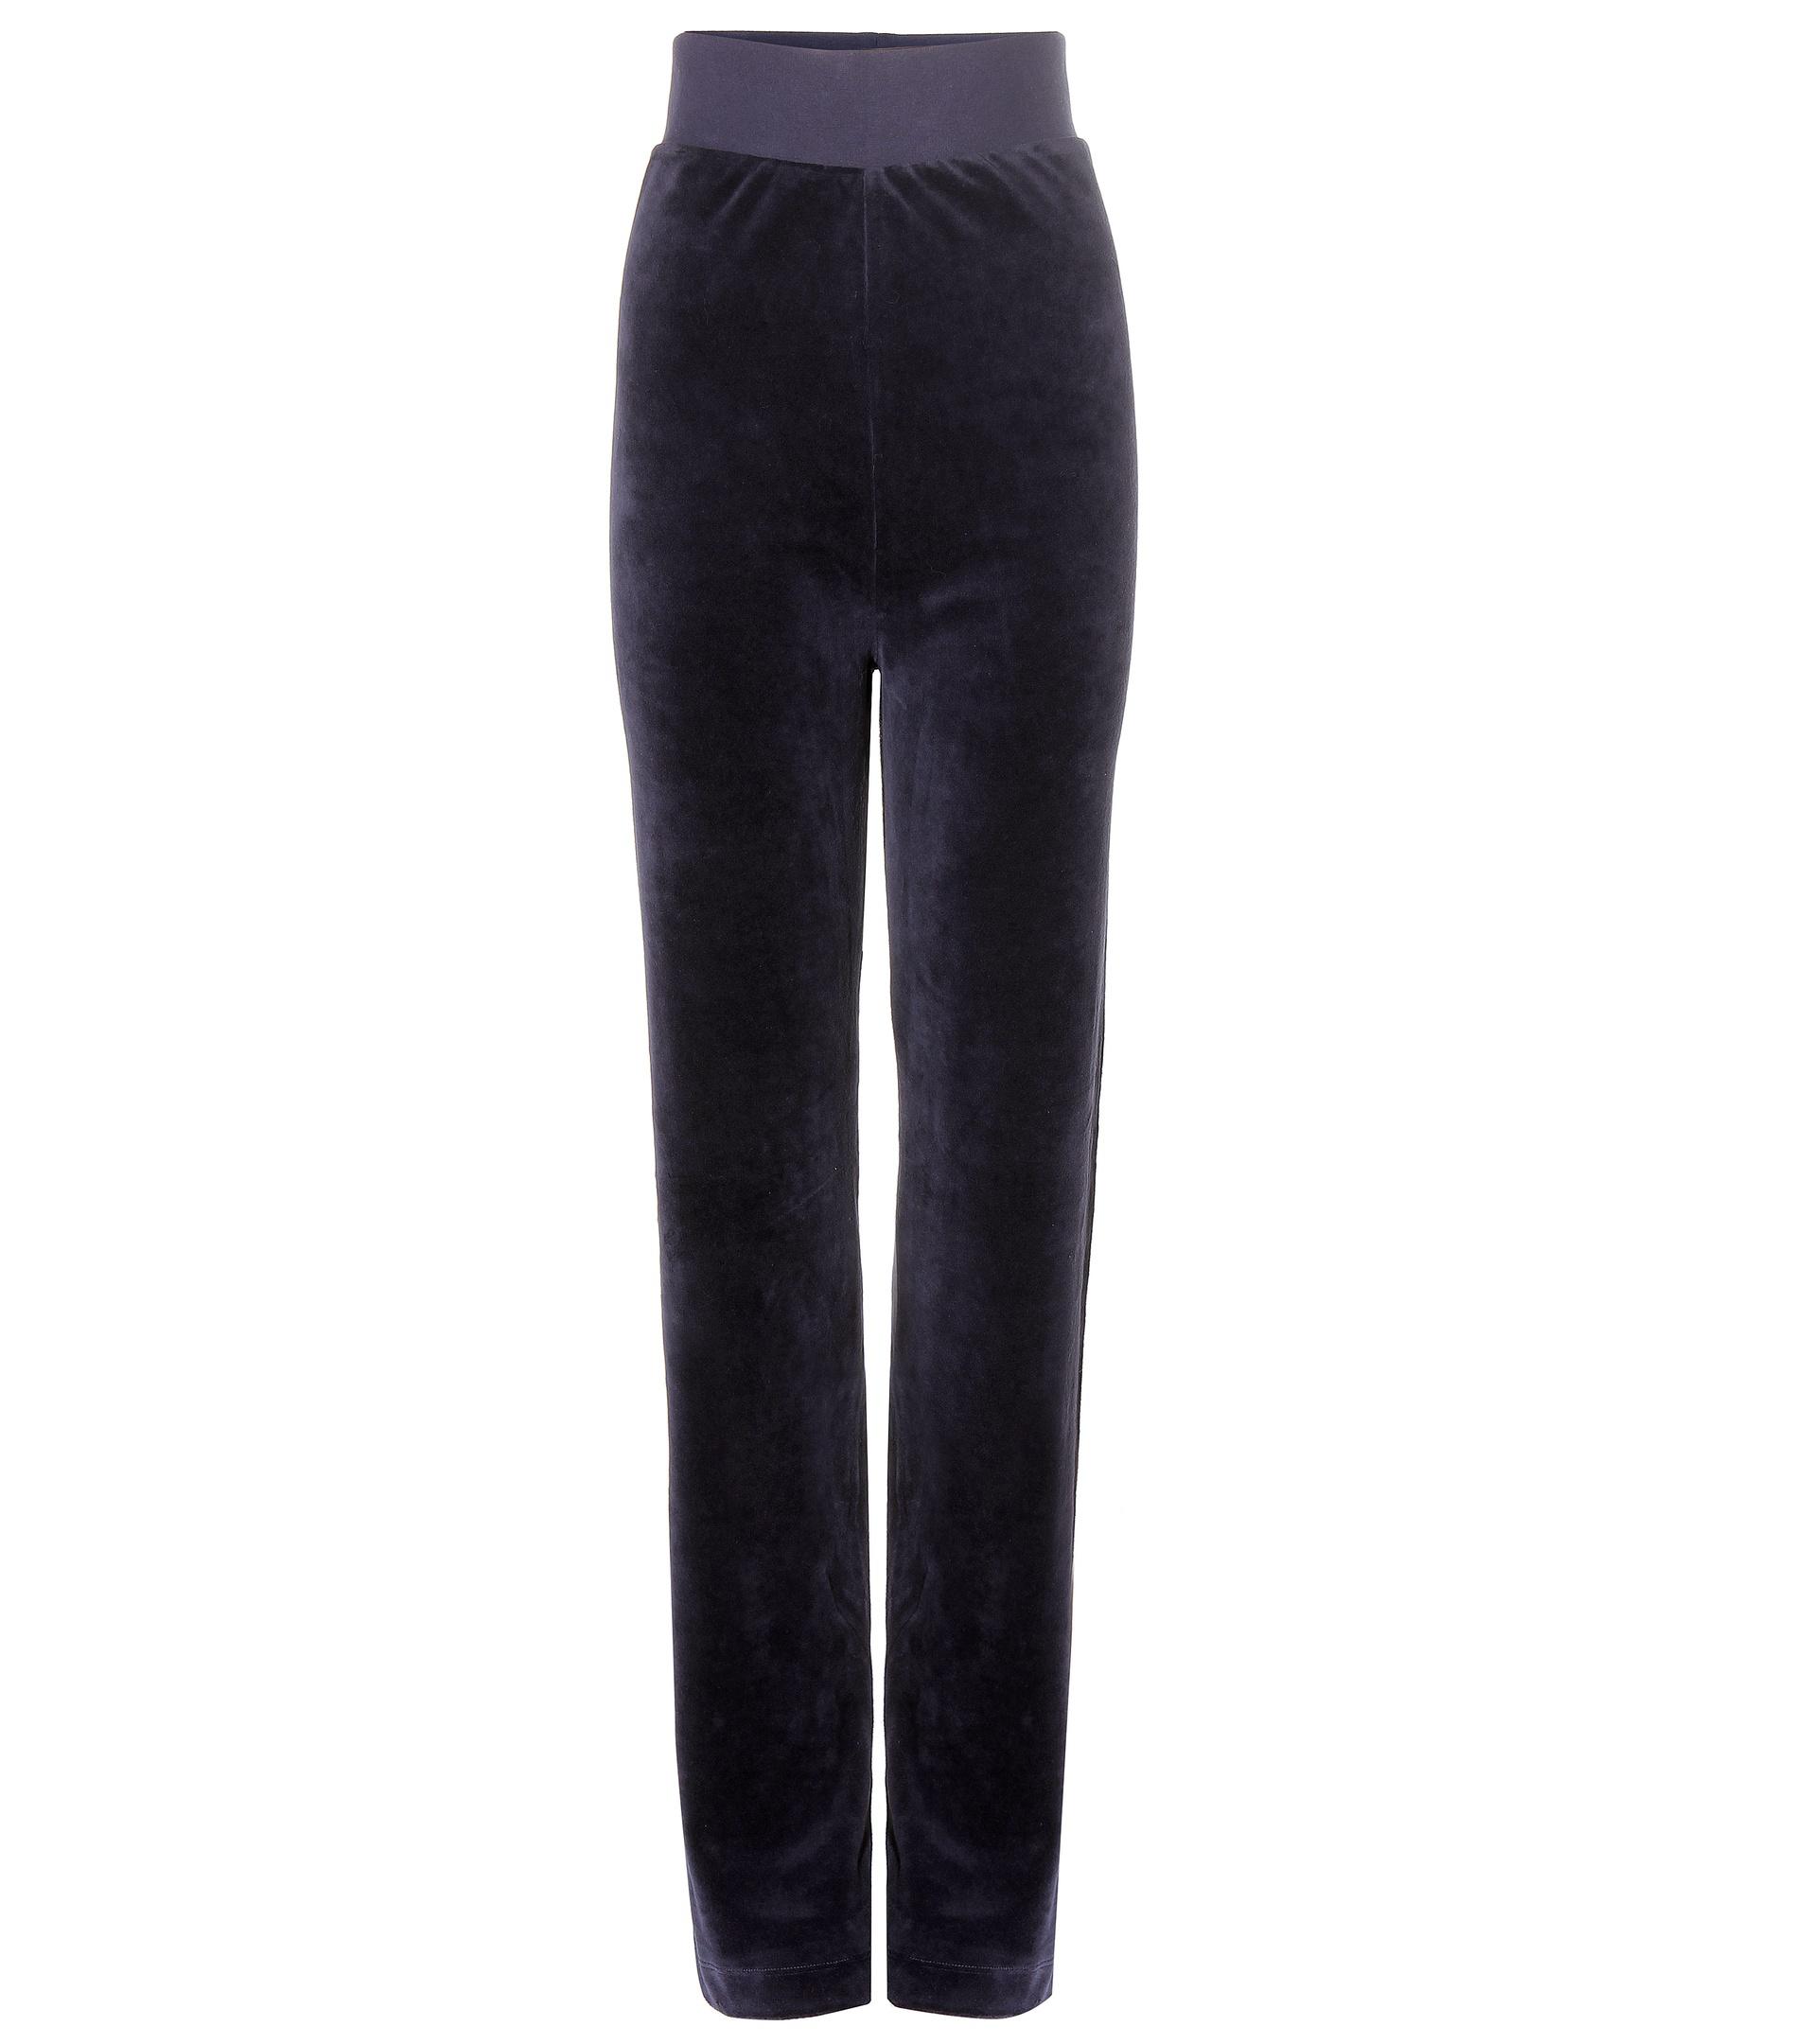 Vetements X Juicy Couture Velour Track Pants in Blue - Lyst